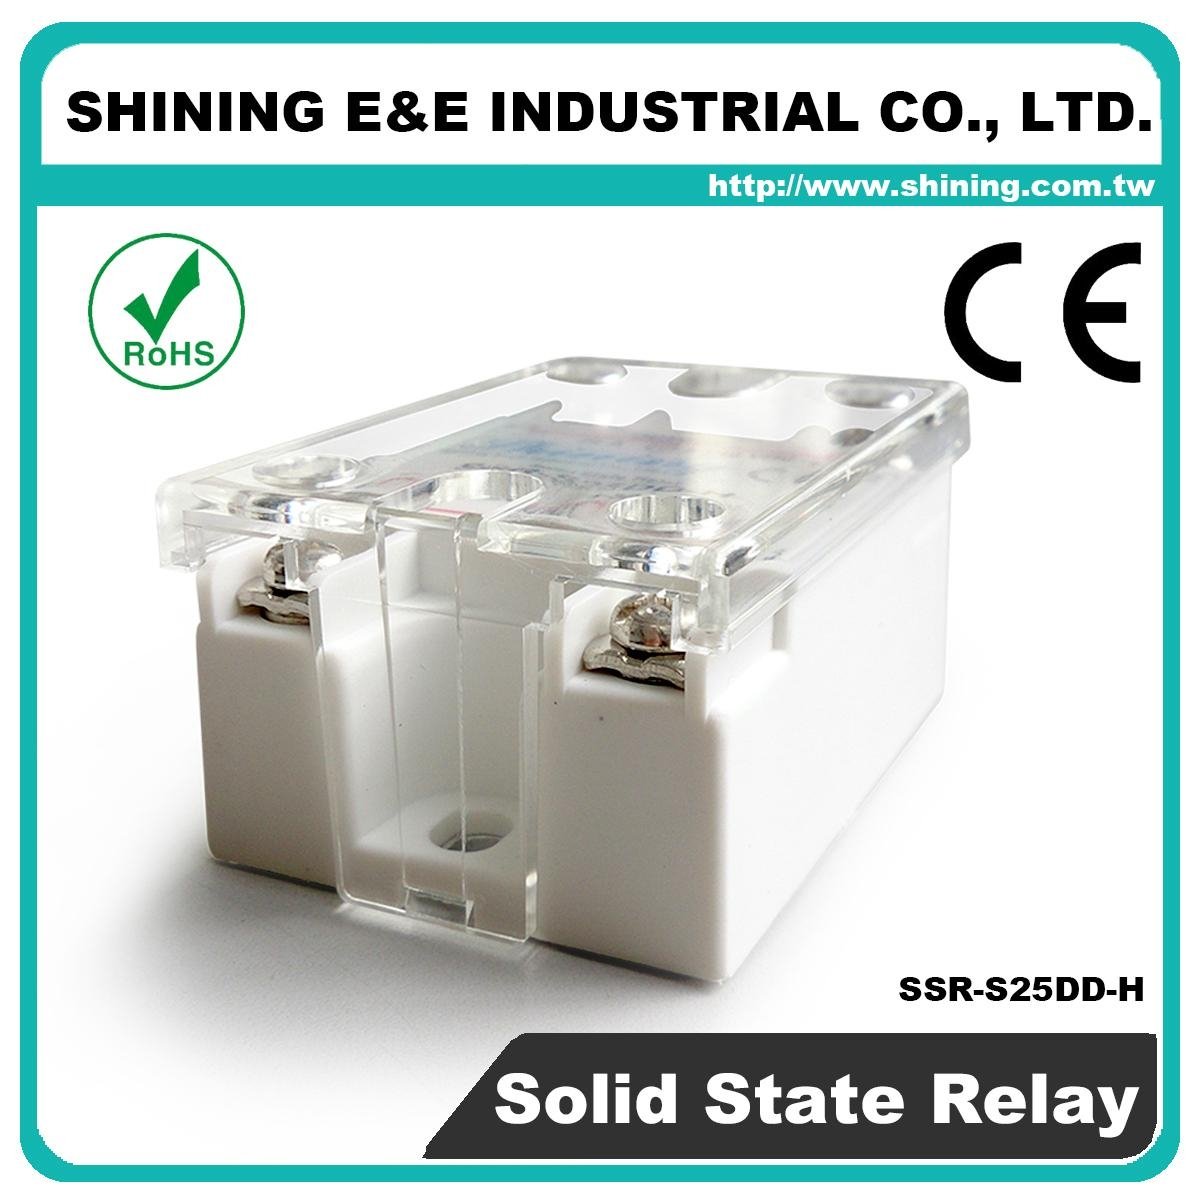 SSR-S25DD-H DC to DC 單相固態繼電器 Solid State Relay 2